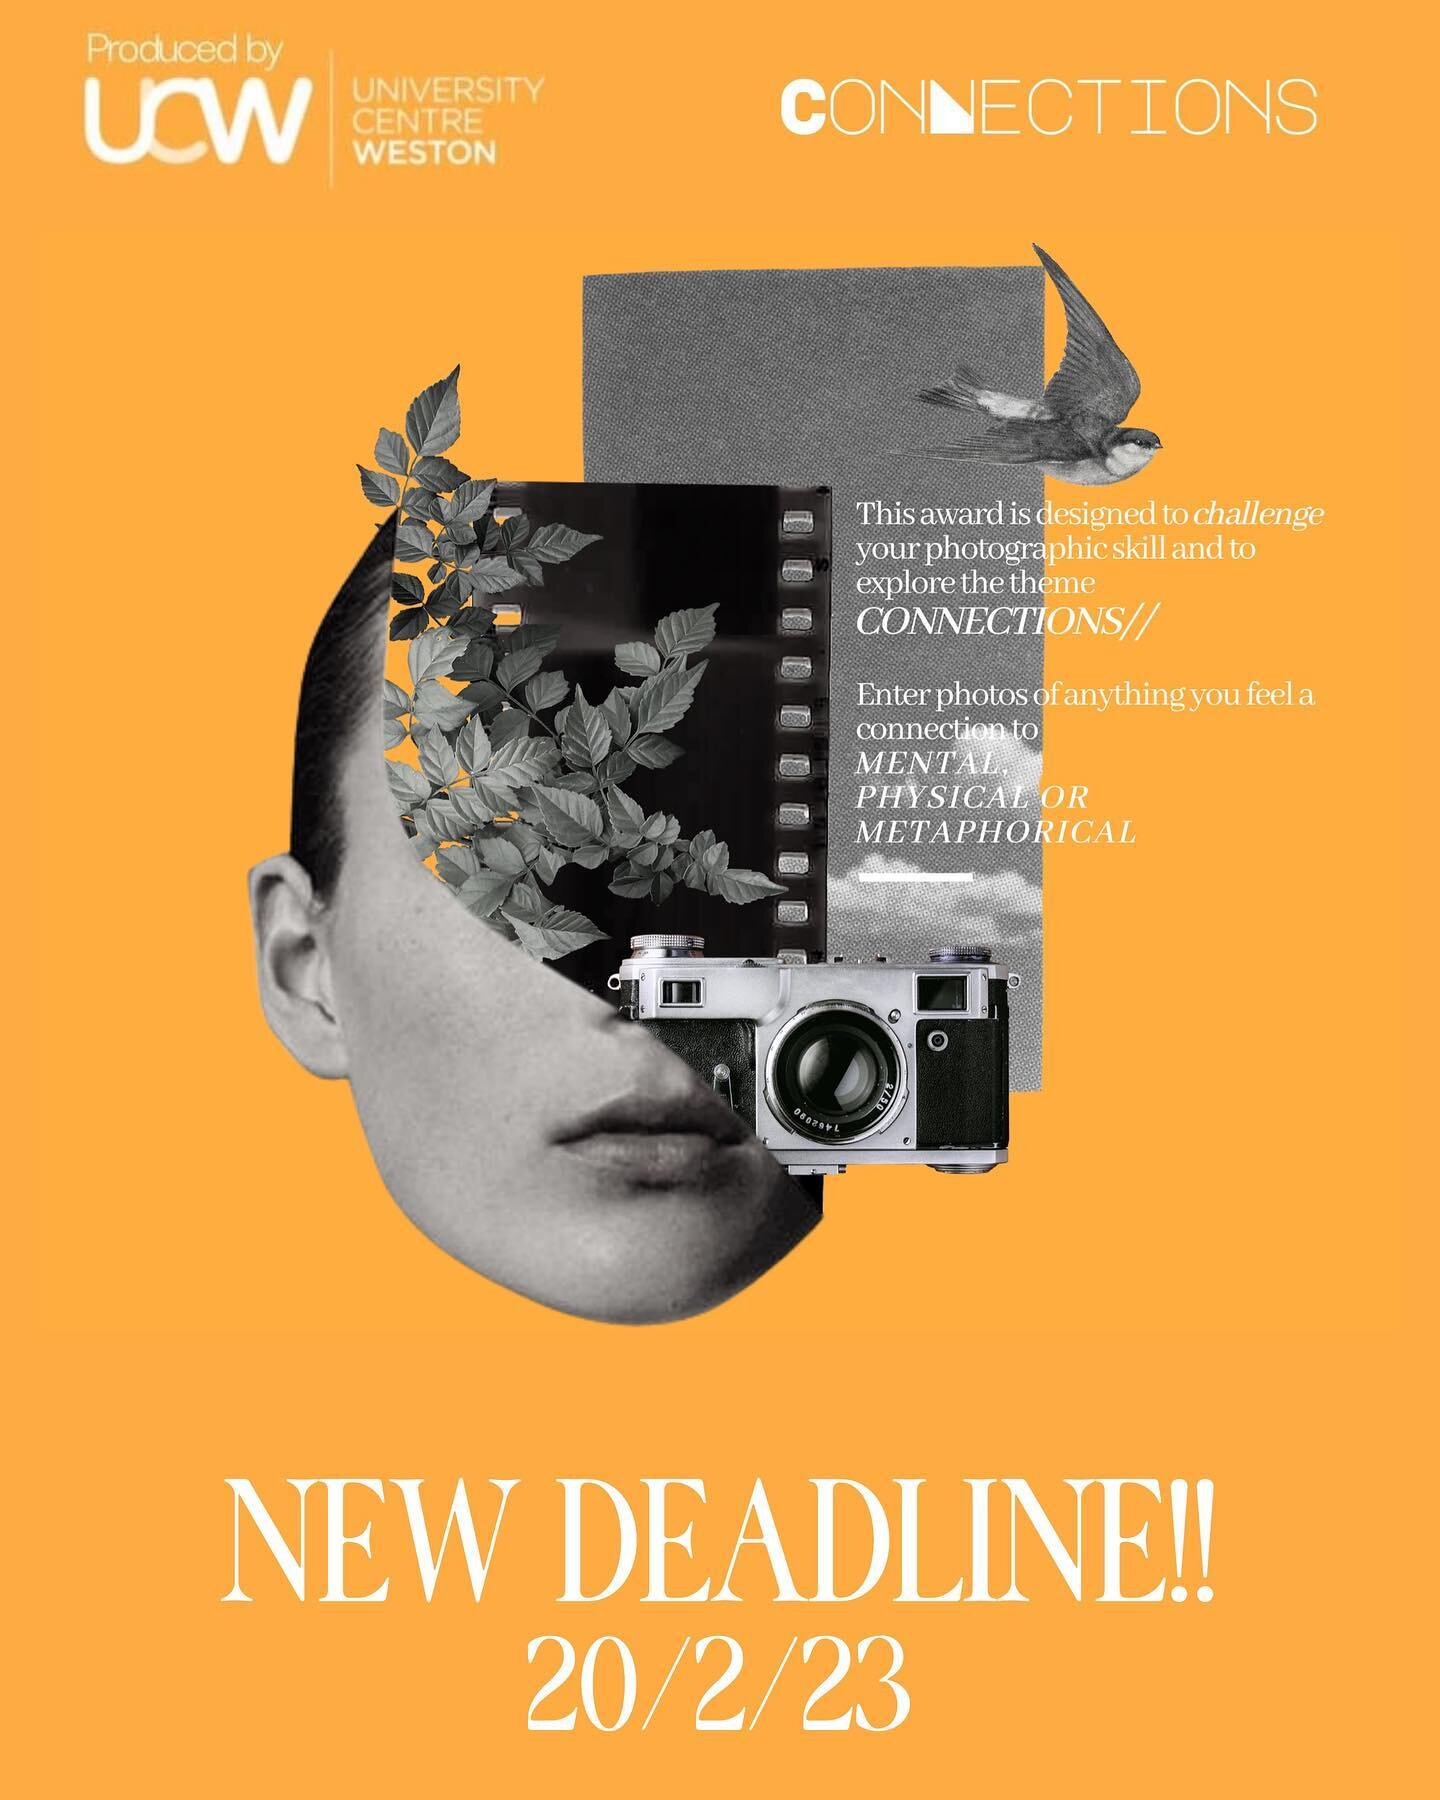 New deadline! By popular demand we have decided to give you all a little extra time to get your work submitted! Our new deadline is 20/2/23! But once this deadline is closed you will not be able to submit any work! We look forward to seeing all your 